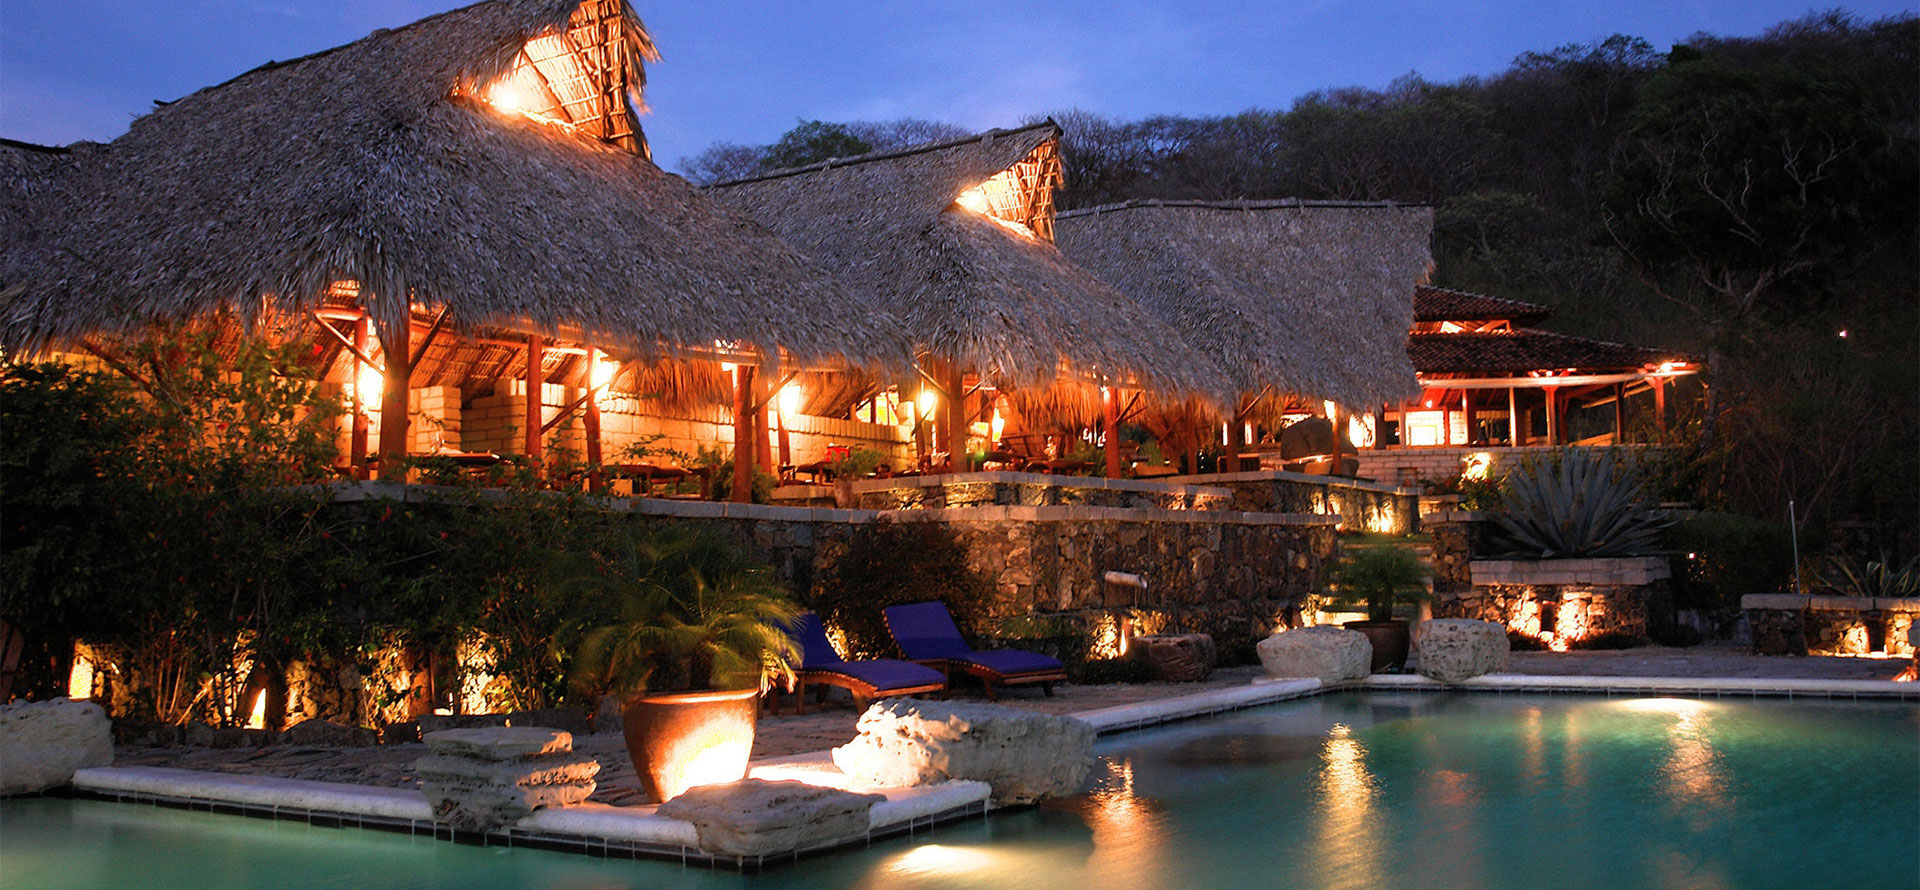 Nicaragua all inclusive resorts at night.